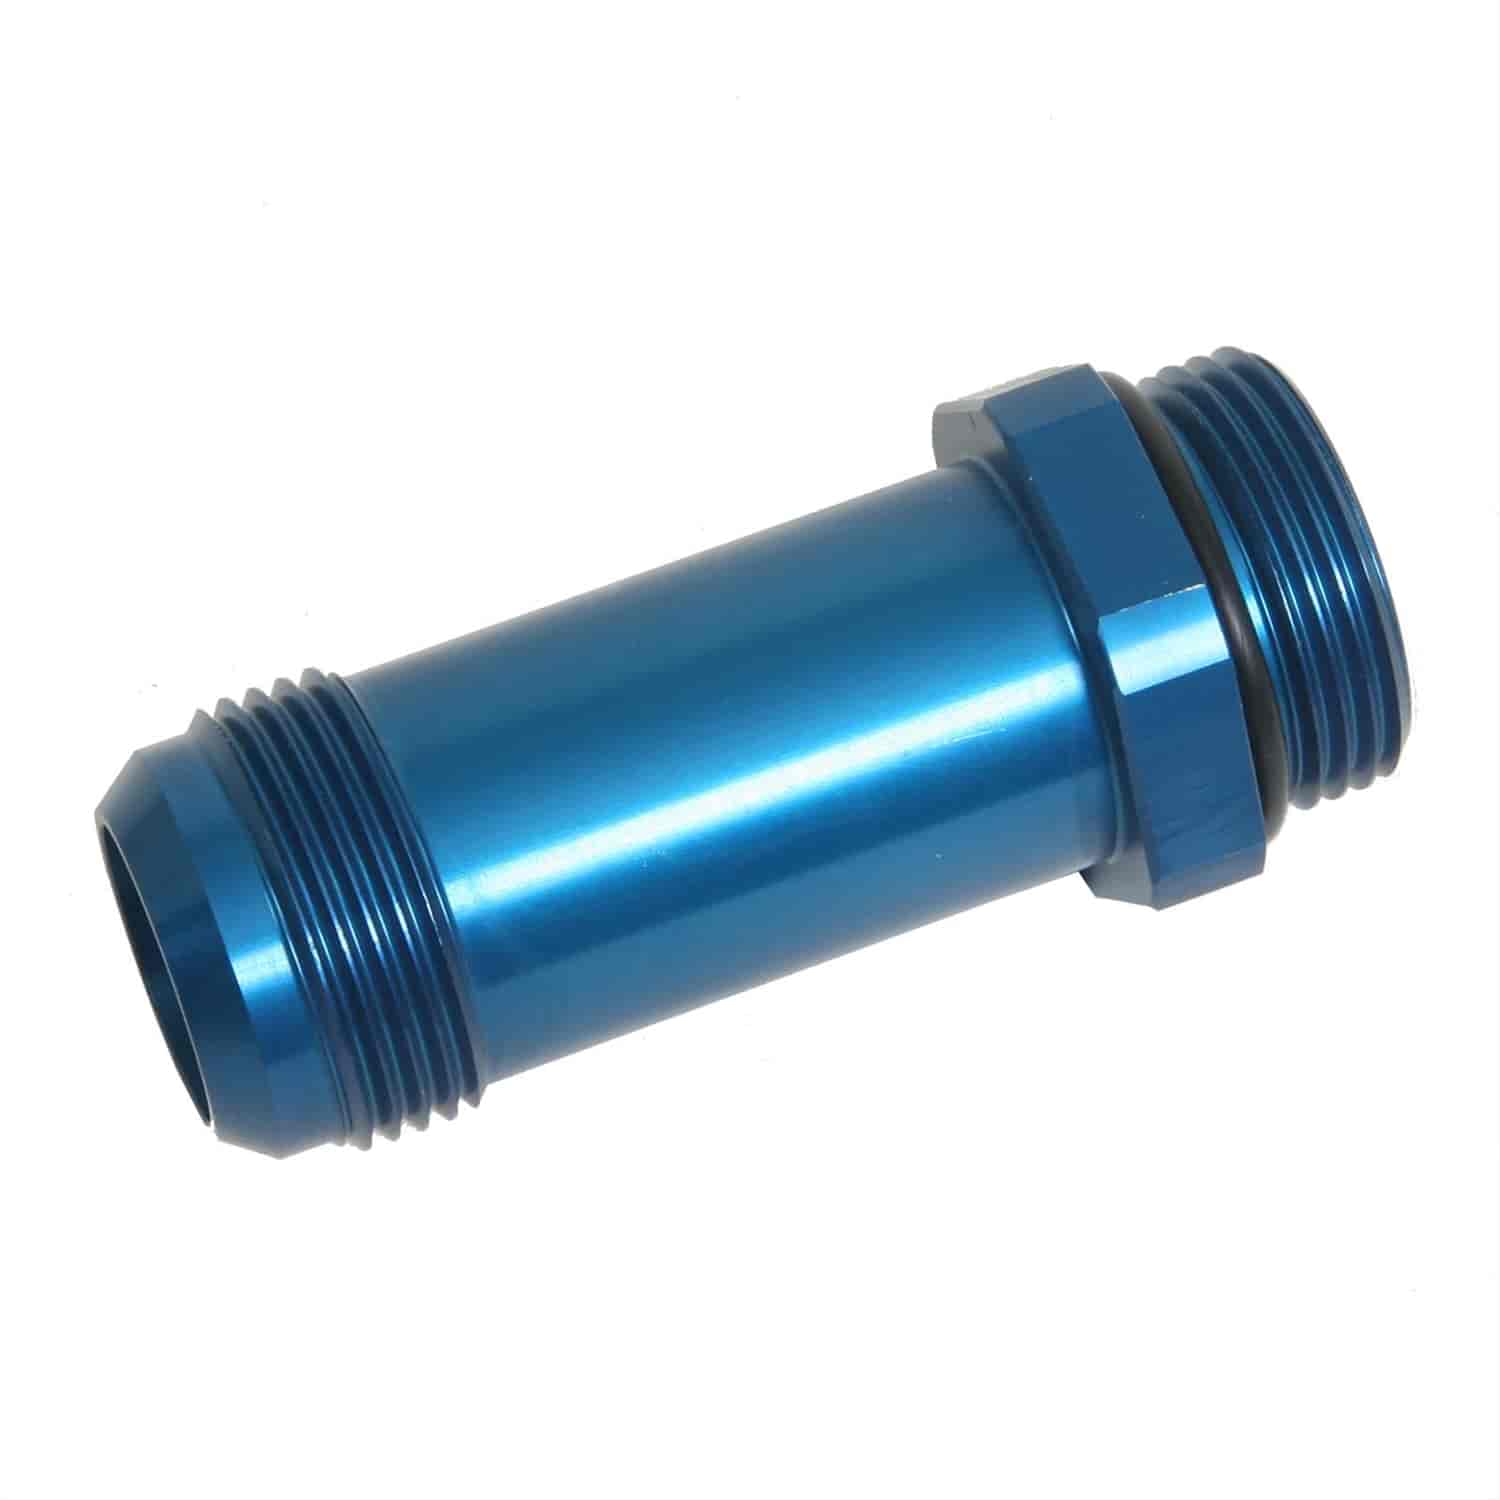 EXTENDED -16AN O-RING BOSS TO -16AN FLARE BLUE